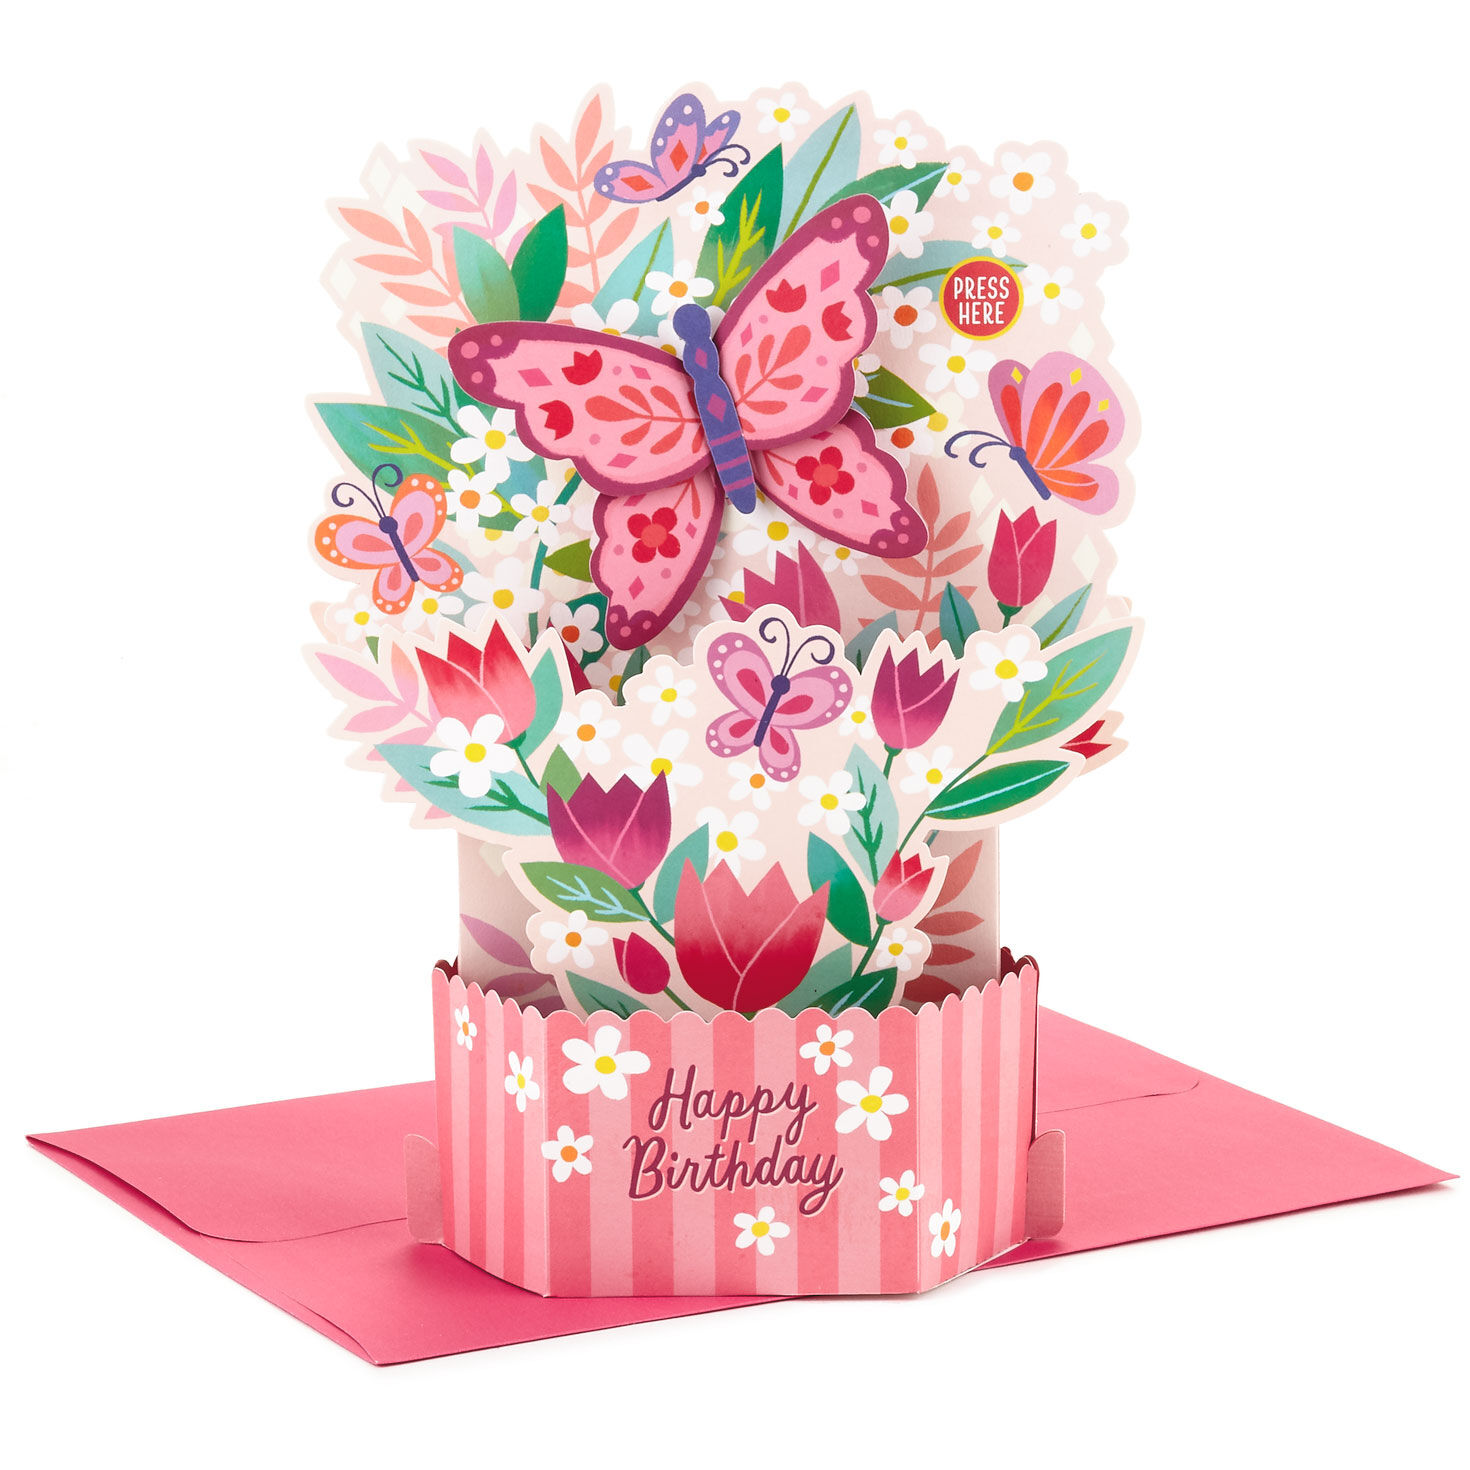 Details about   Hallmark Thinking of You Signature Card ~ Pop UP Explosion Pastel Butterflies 